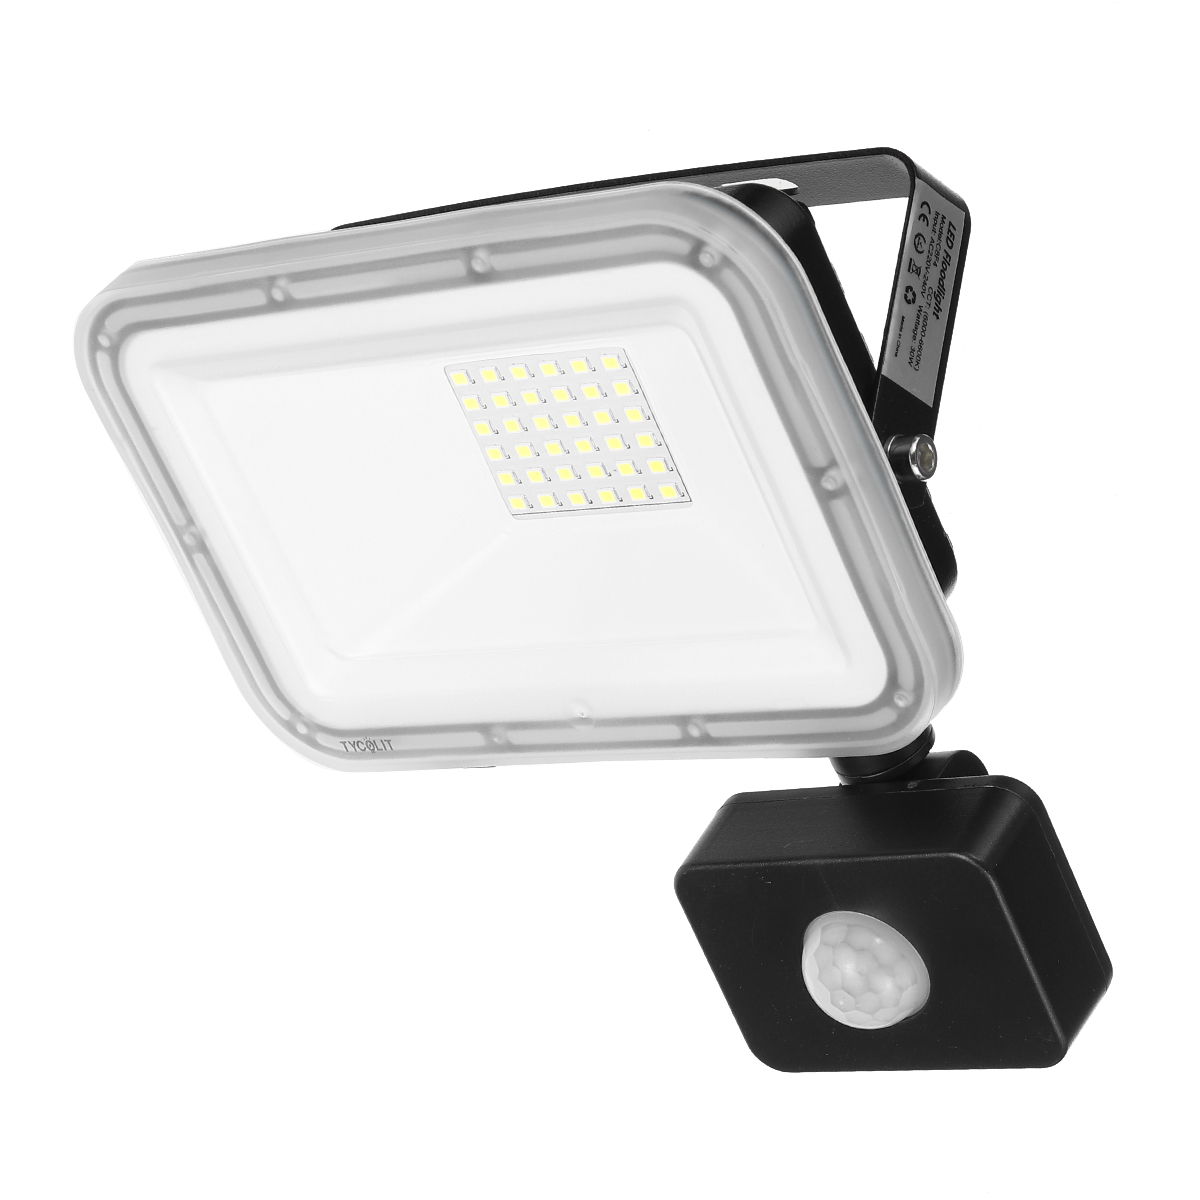 Find LED Floodlight PIR Sensor Motion 10 100W Outdoor Garden Security Flood Light IP65 for Sale on Gipsybee.com with cryptocurrencies